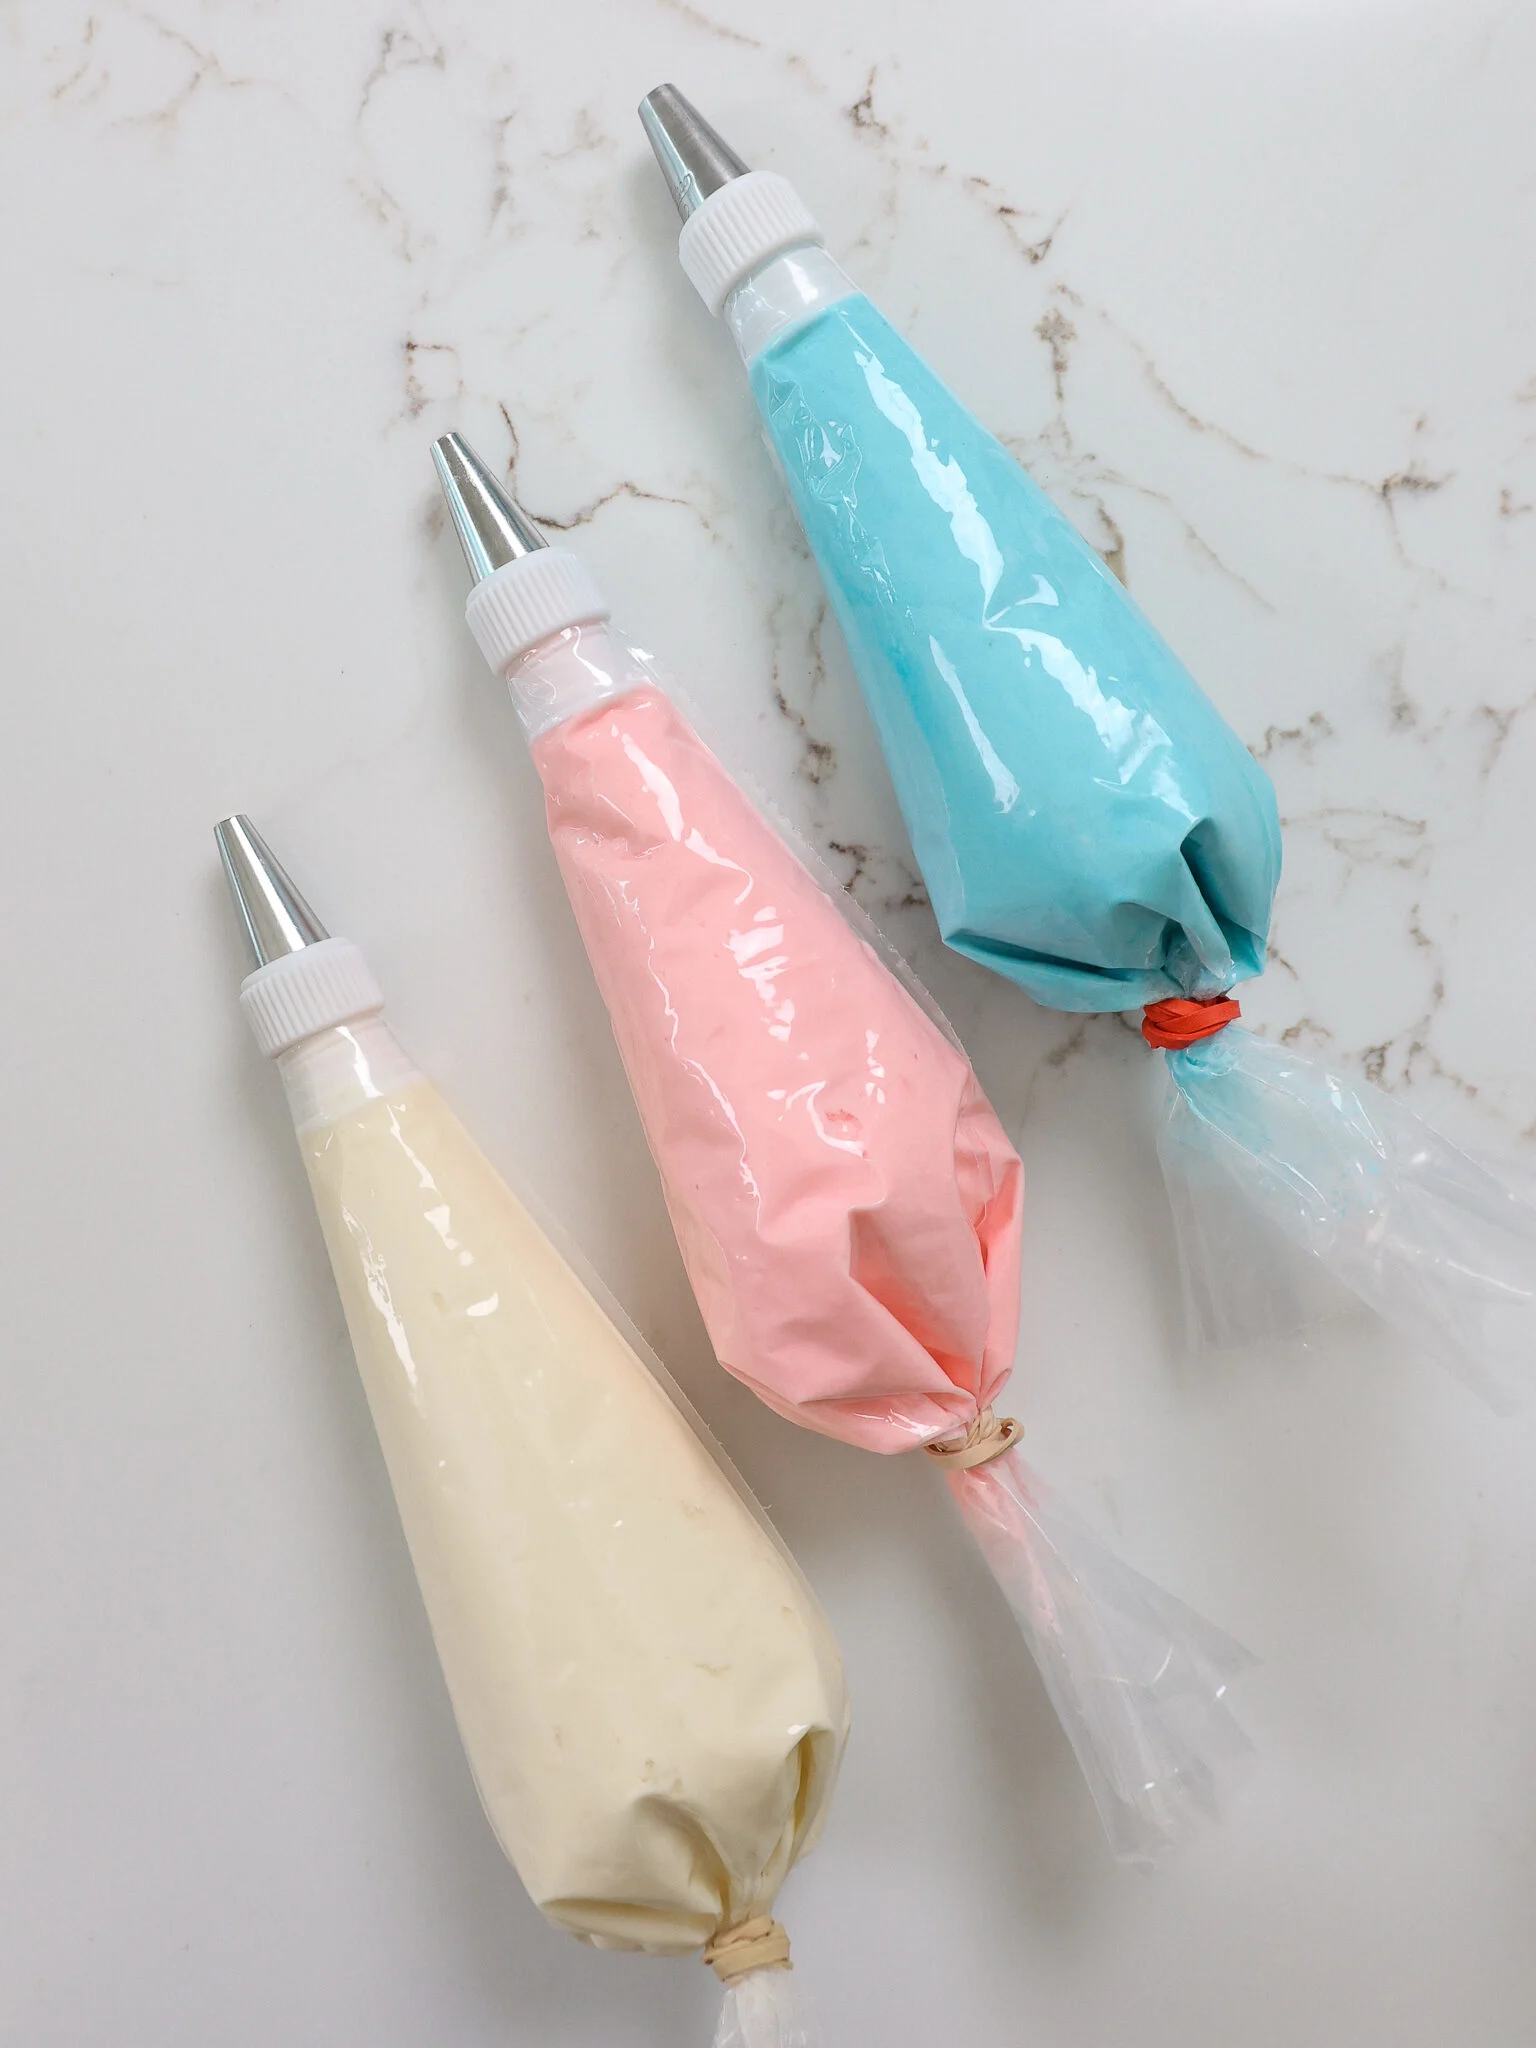 image of three piping bags filled with light pink, light blue, and white buttercream frosting